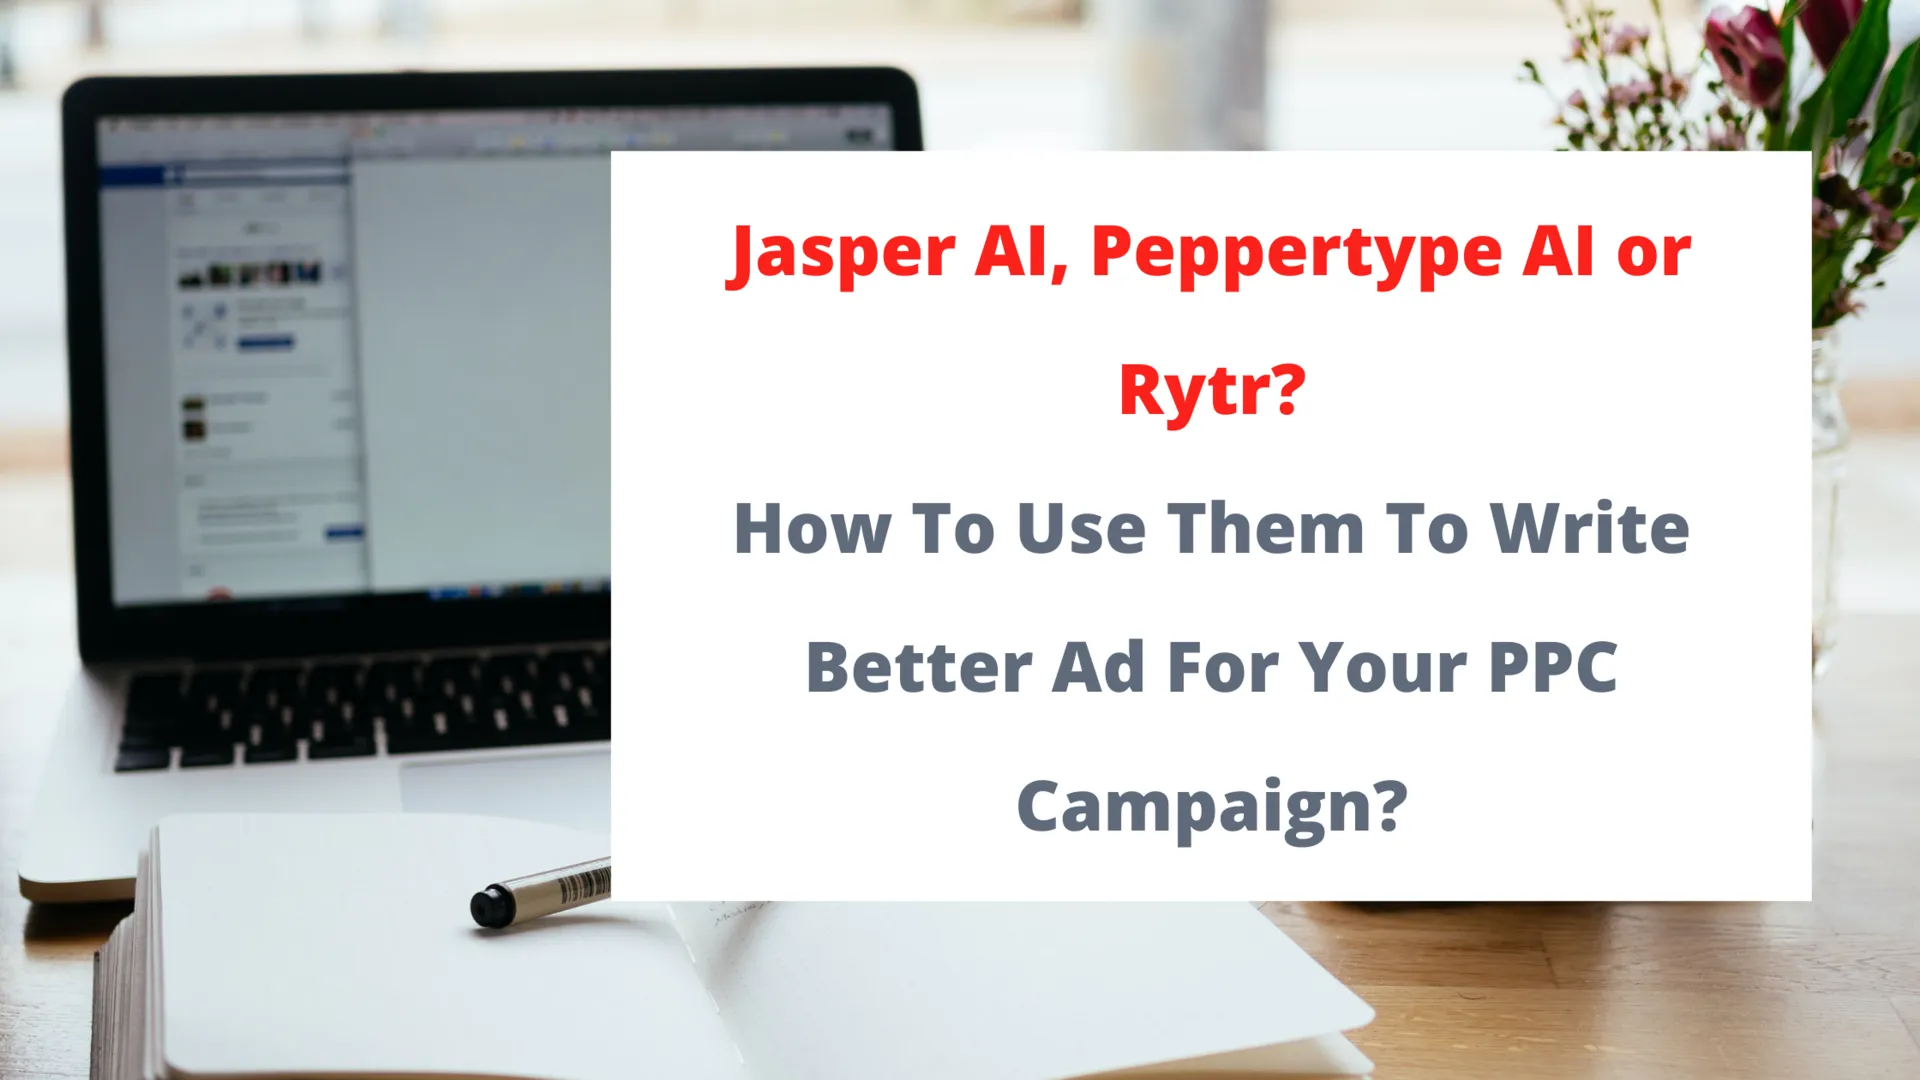 Jasper AI, Peppertype AI or Rytr? How To Use Them To Write Better Ad For Your PPC Campaign?